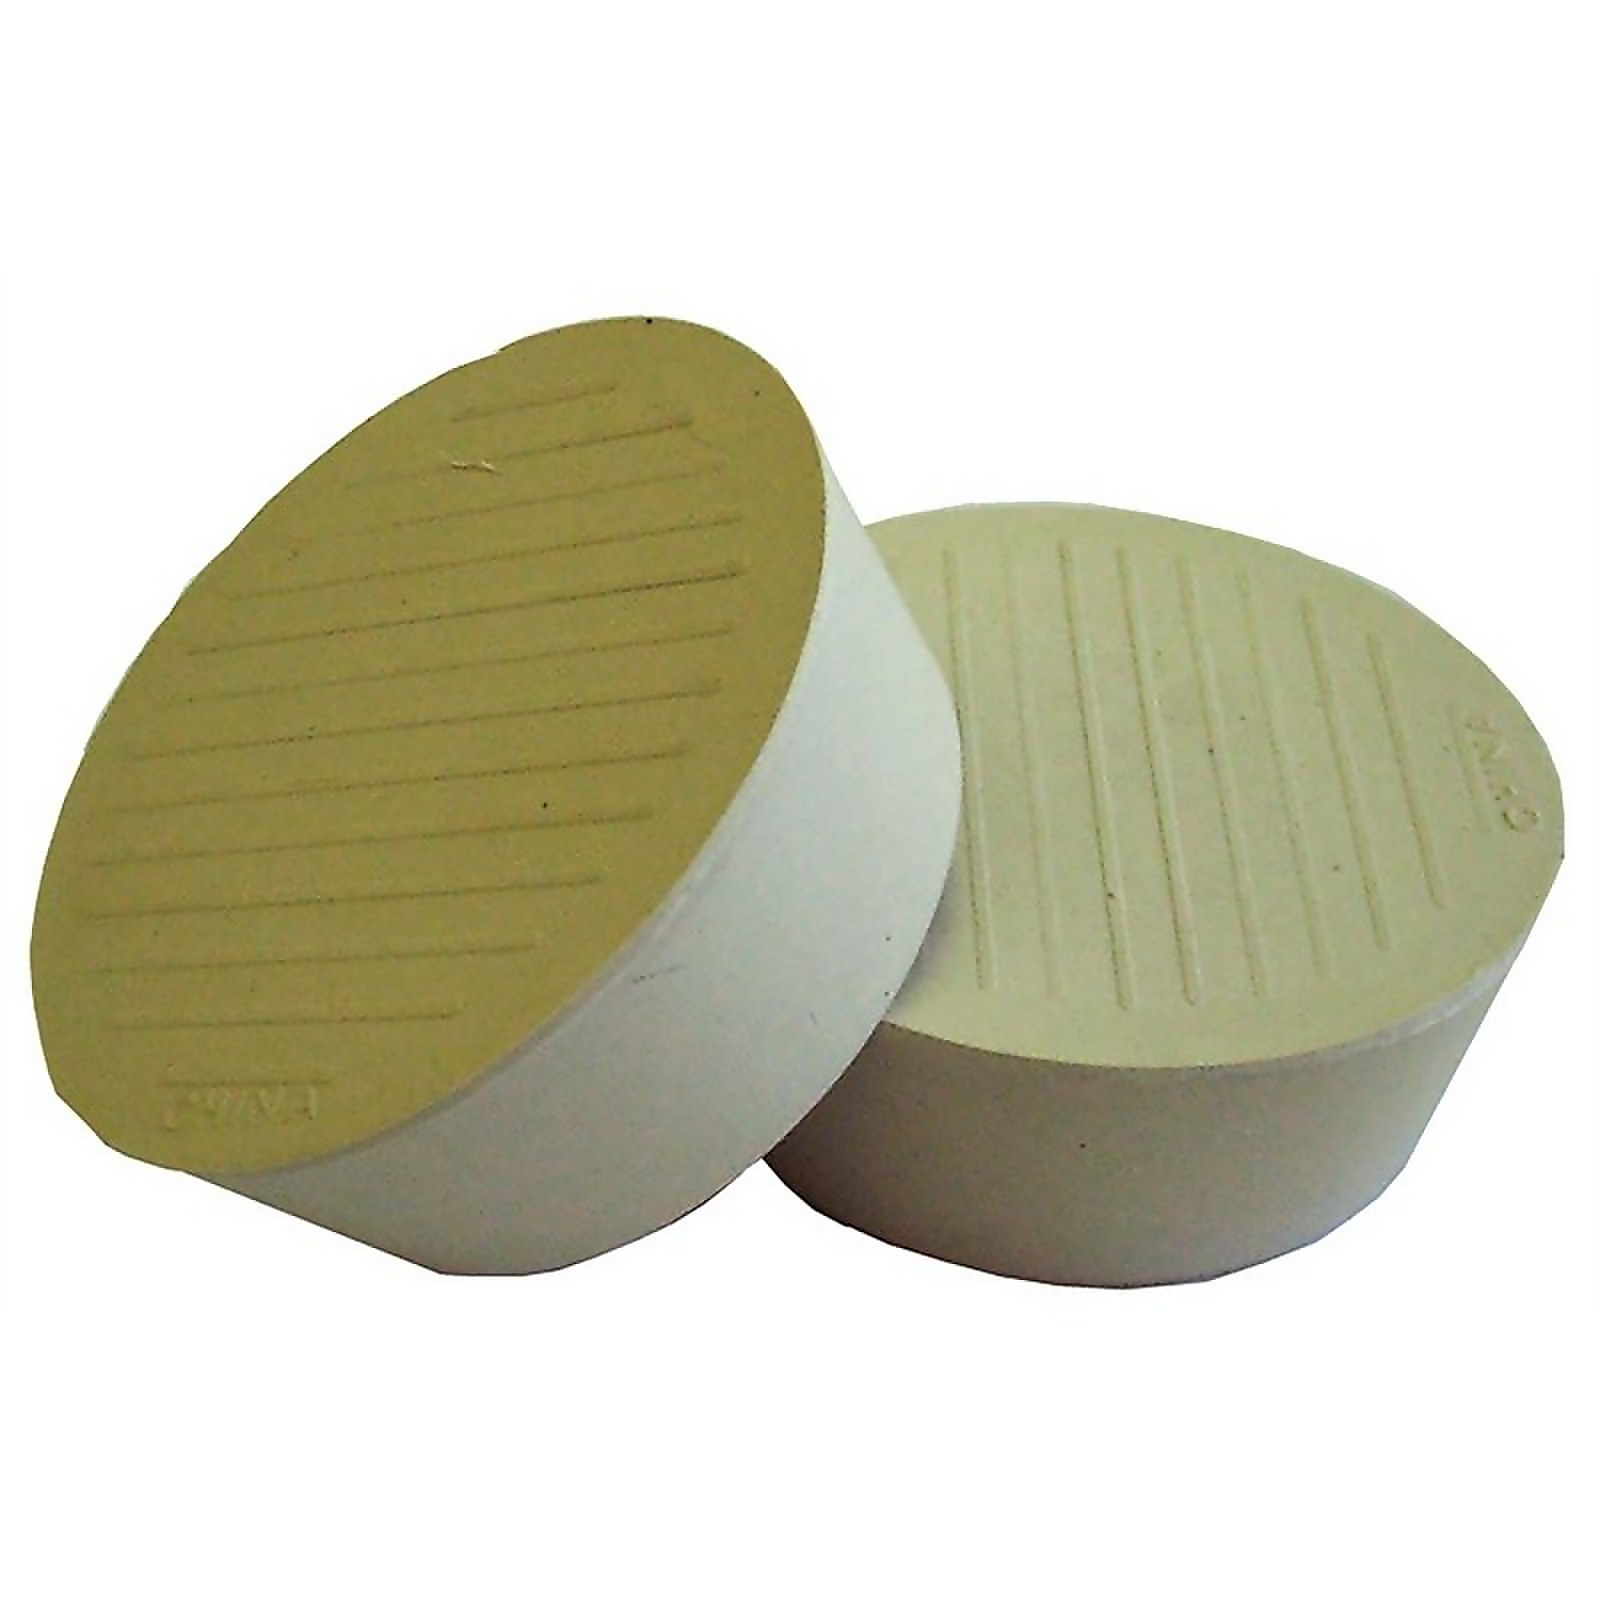 Photo of Rubber Castor Cup - 44mm - 4 Pack